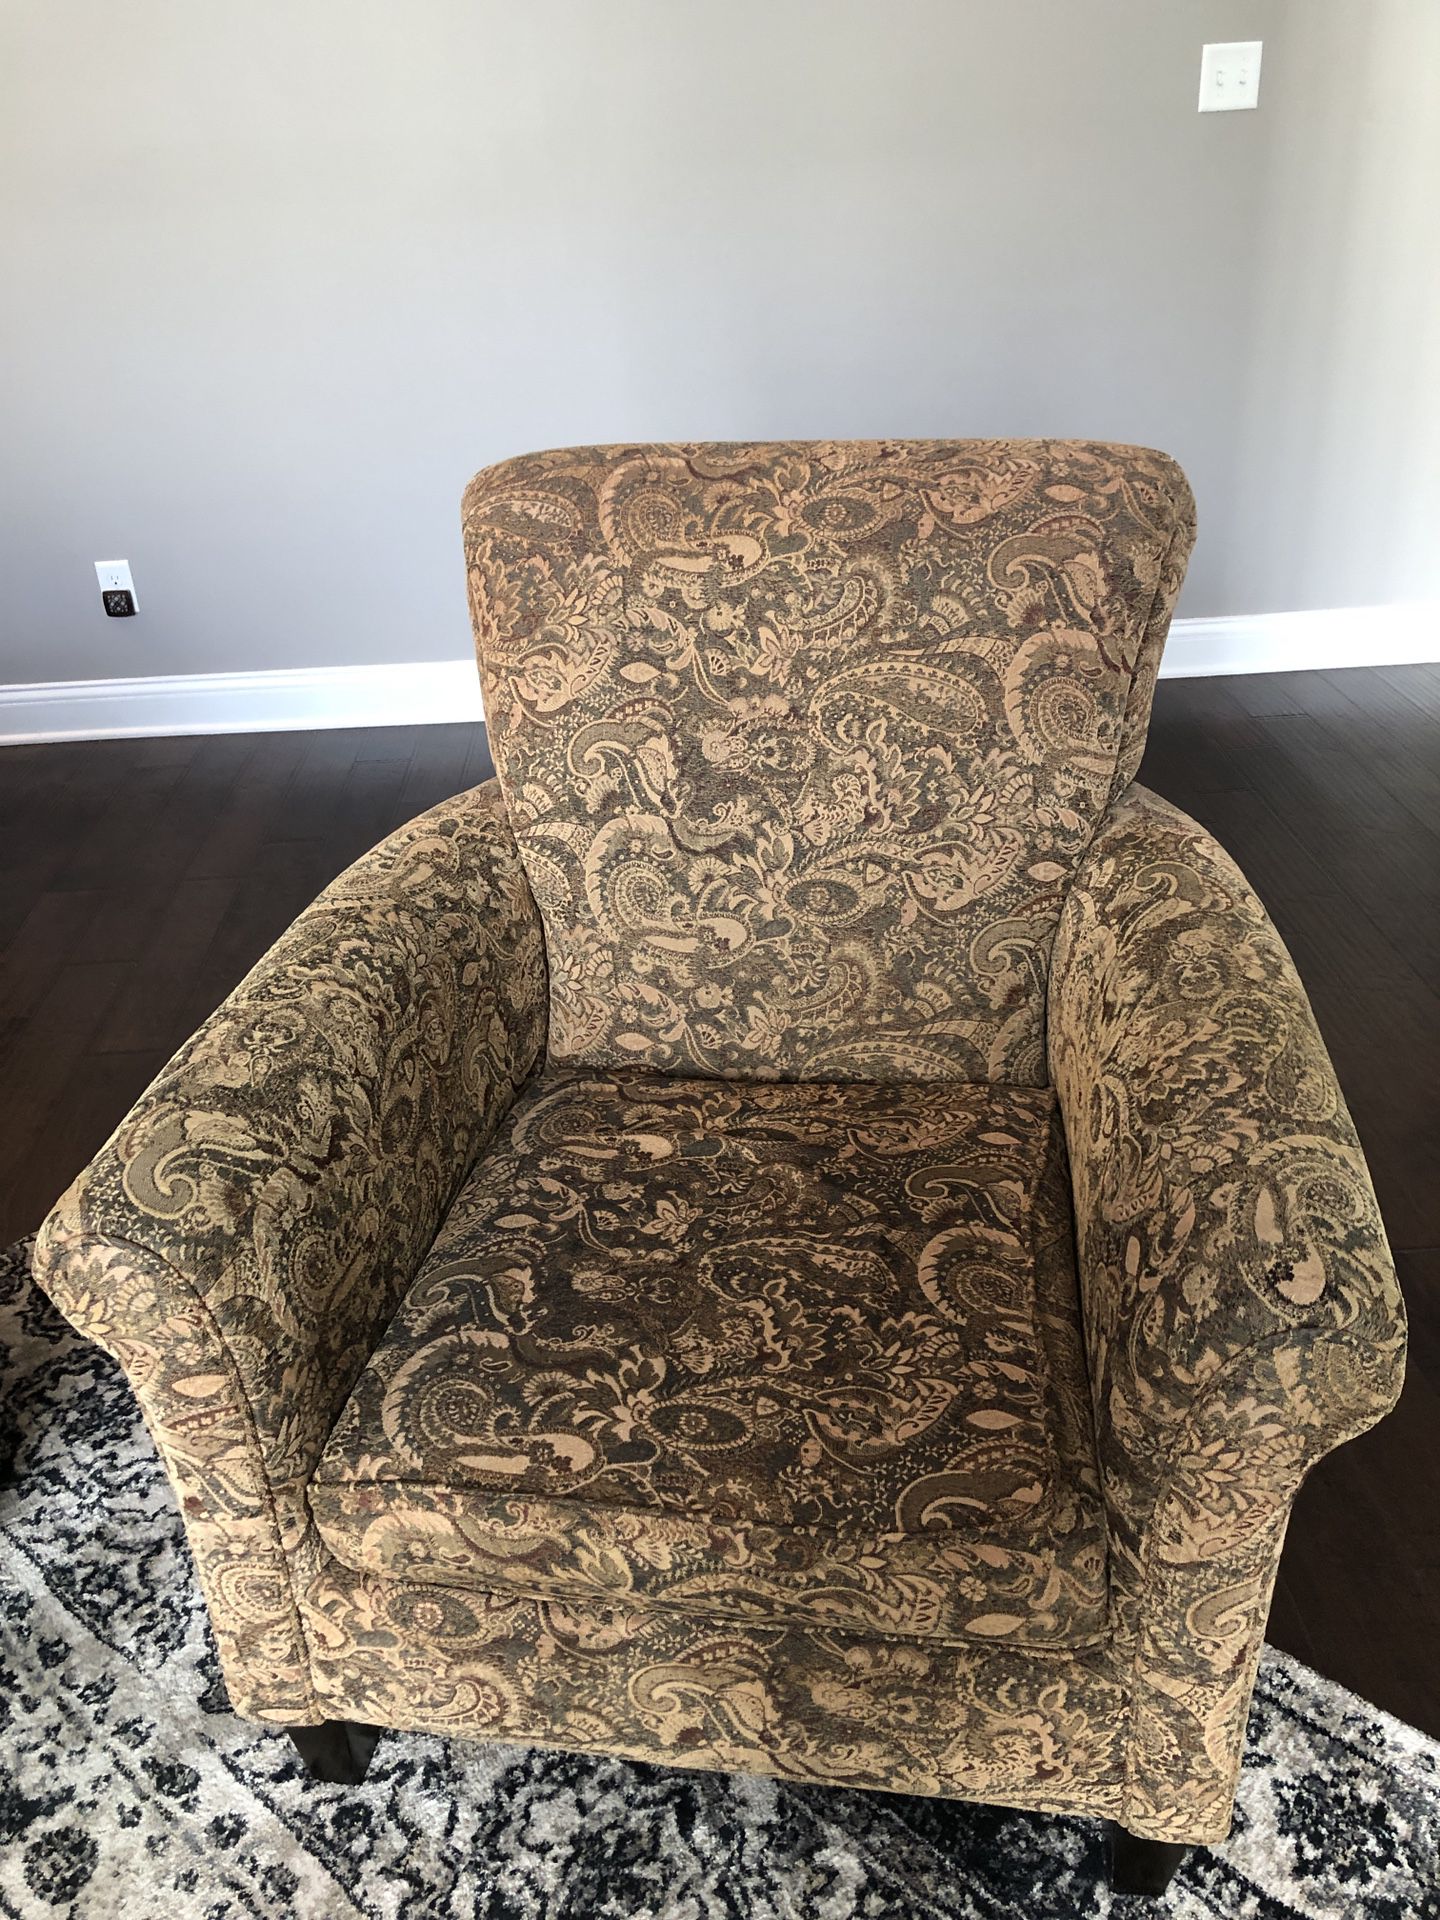 2 Upholstered Arm Chairs